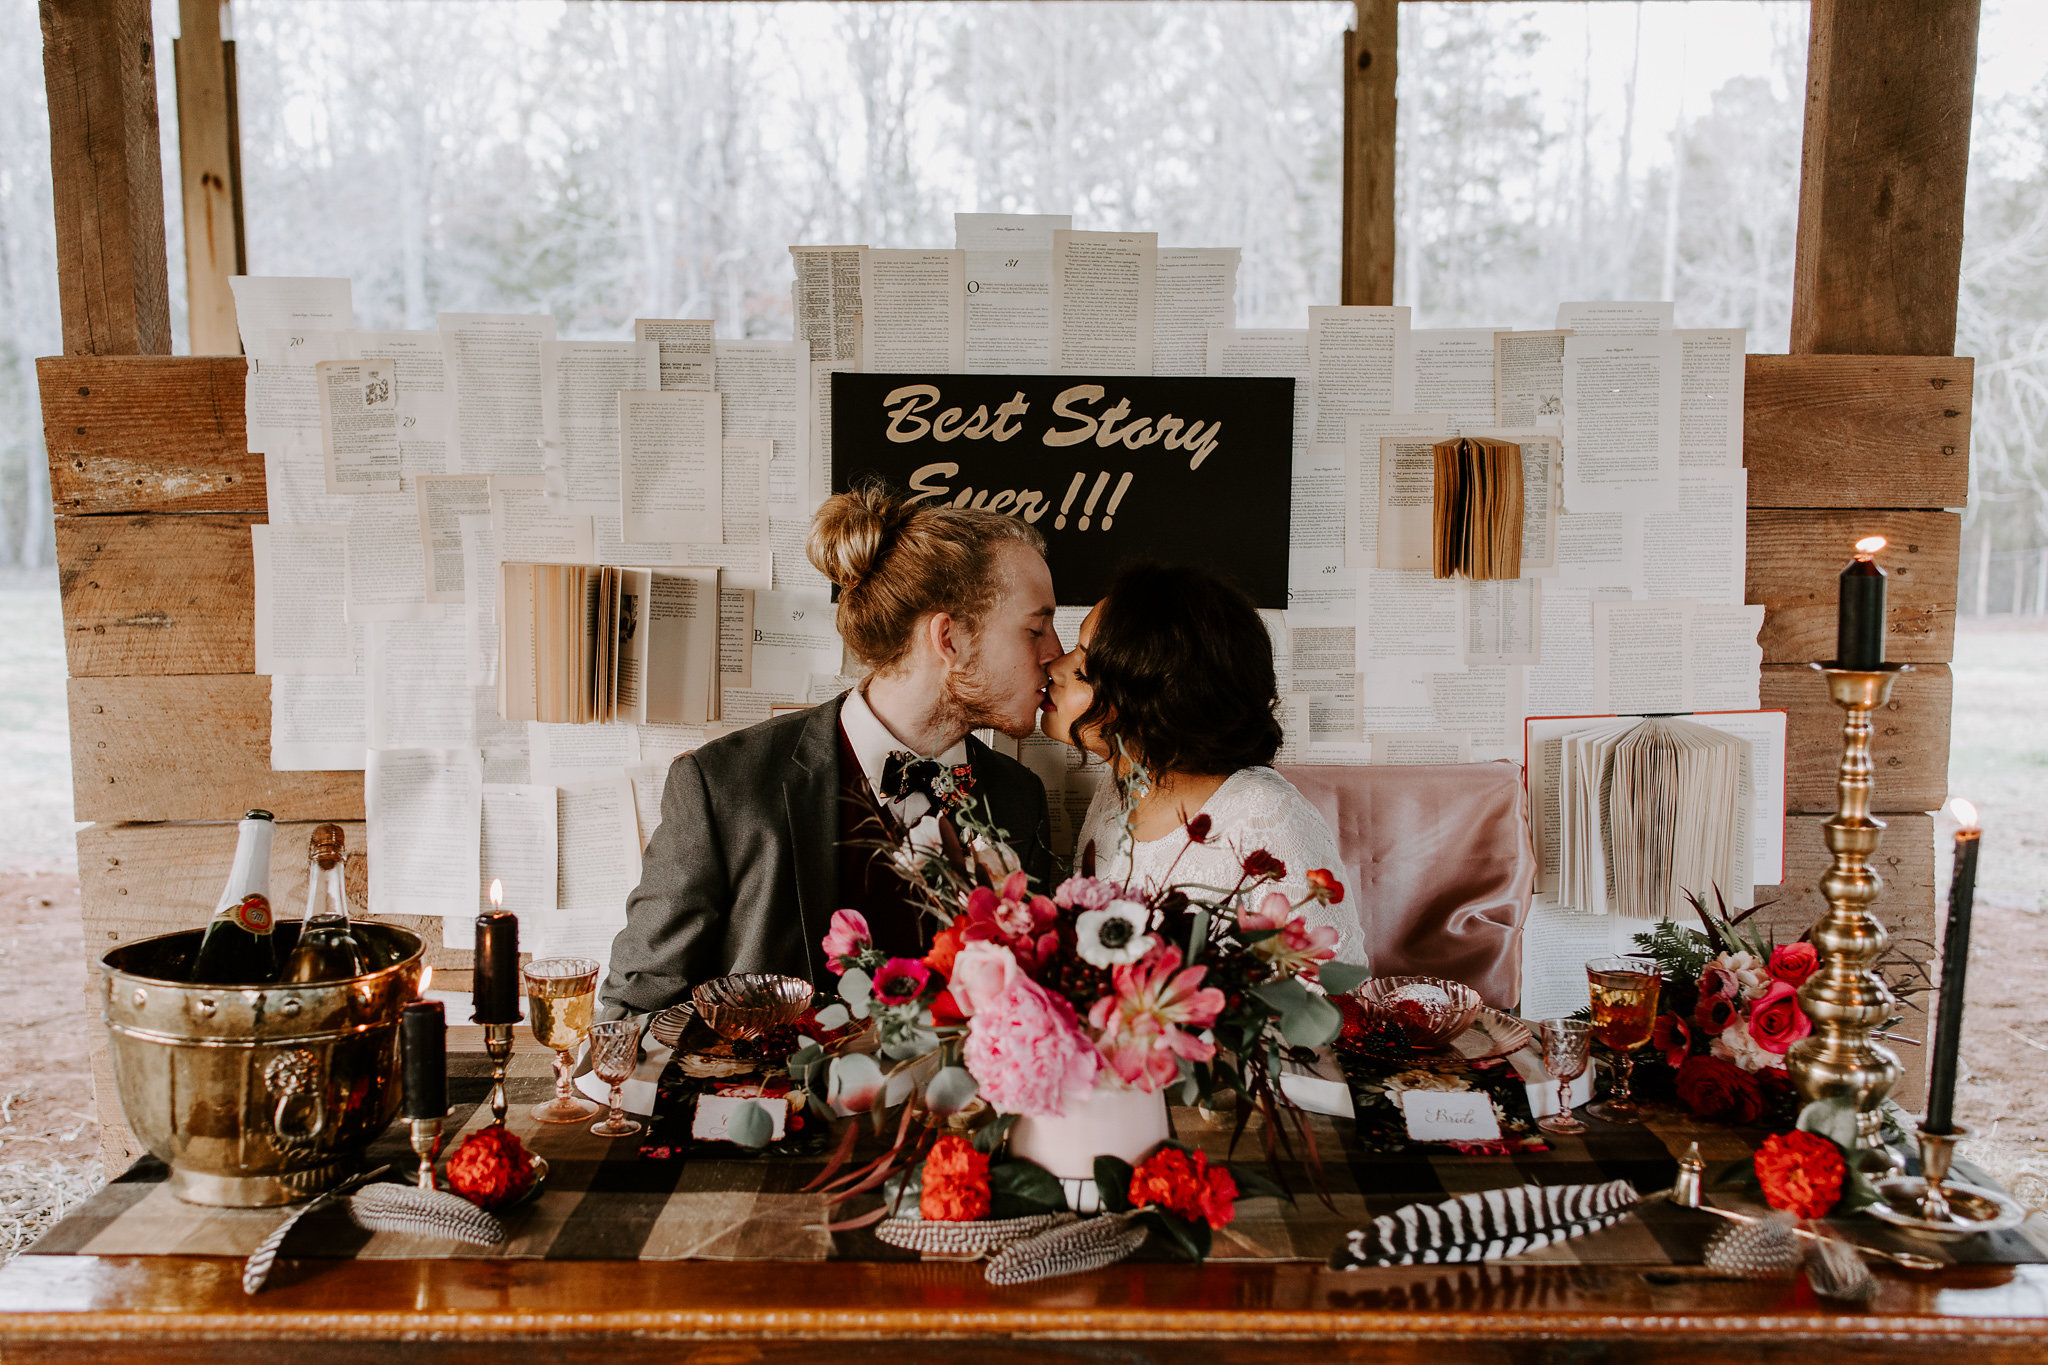 Bride and Groom Kissing Behind Table Decorated with Red Dining Ware and Red Cake for Valentine's Day